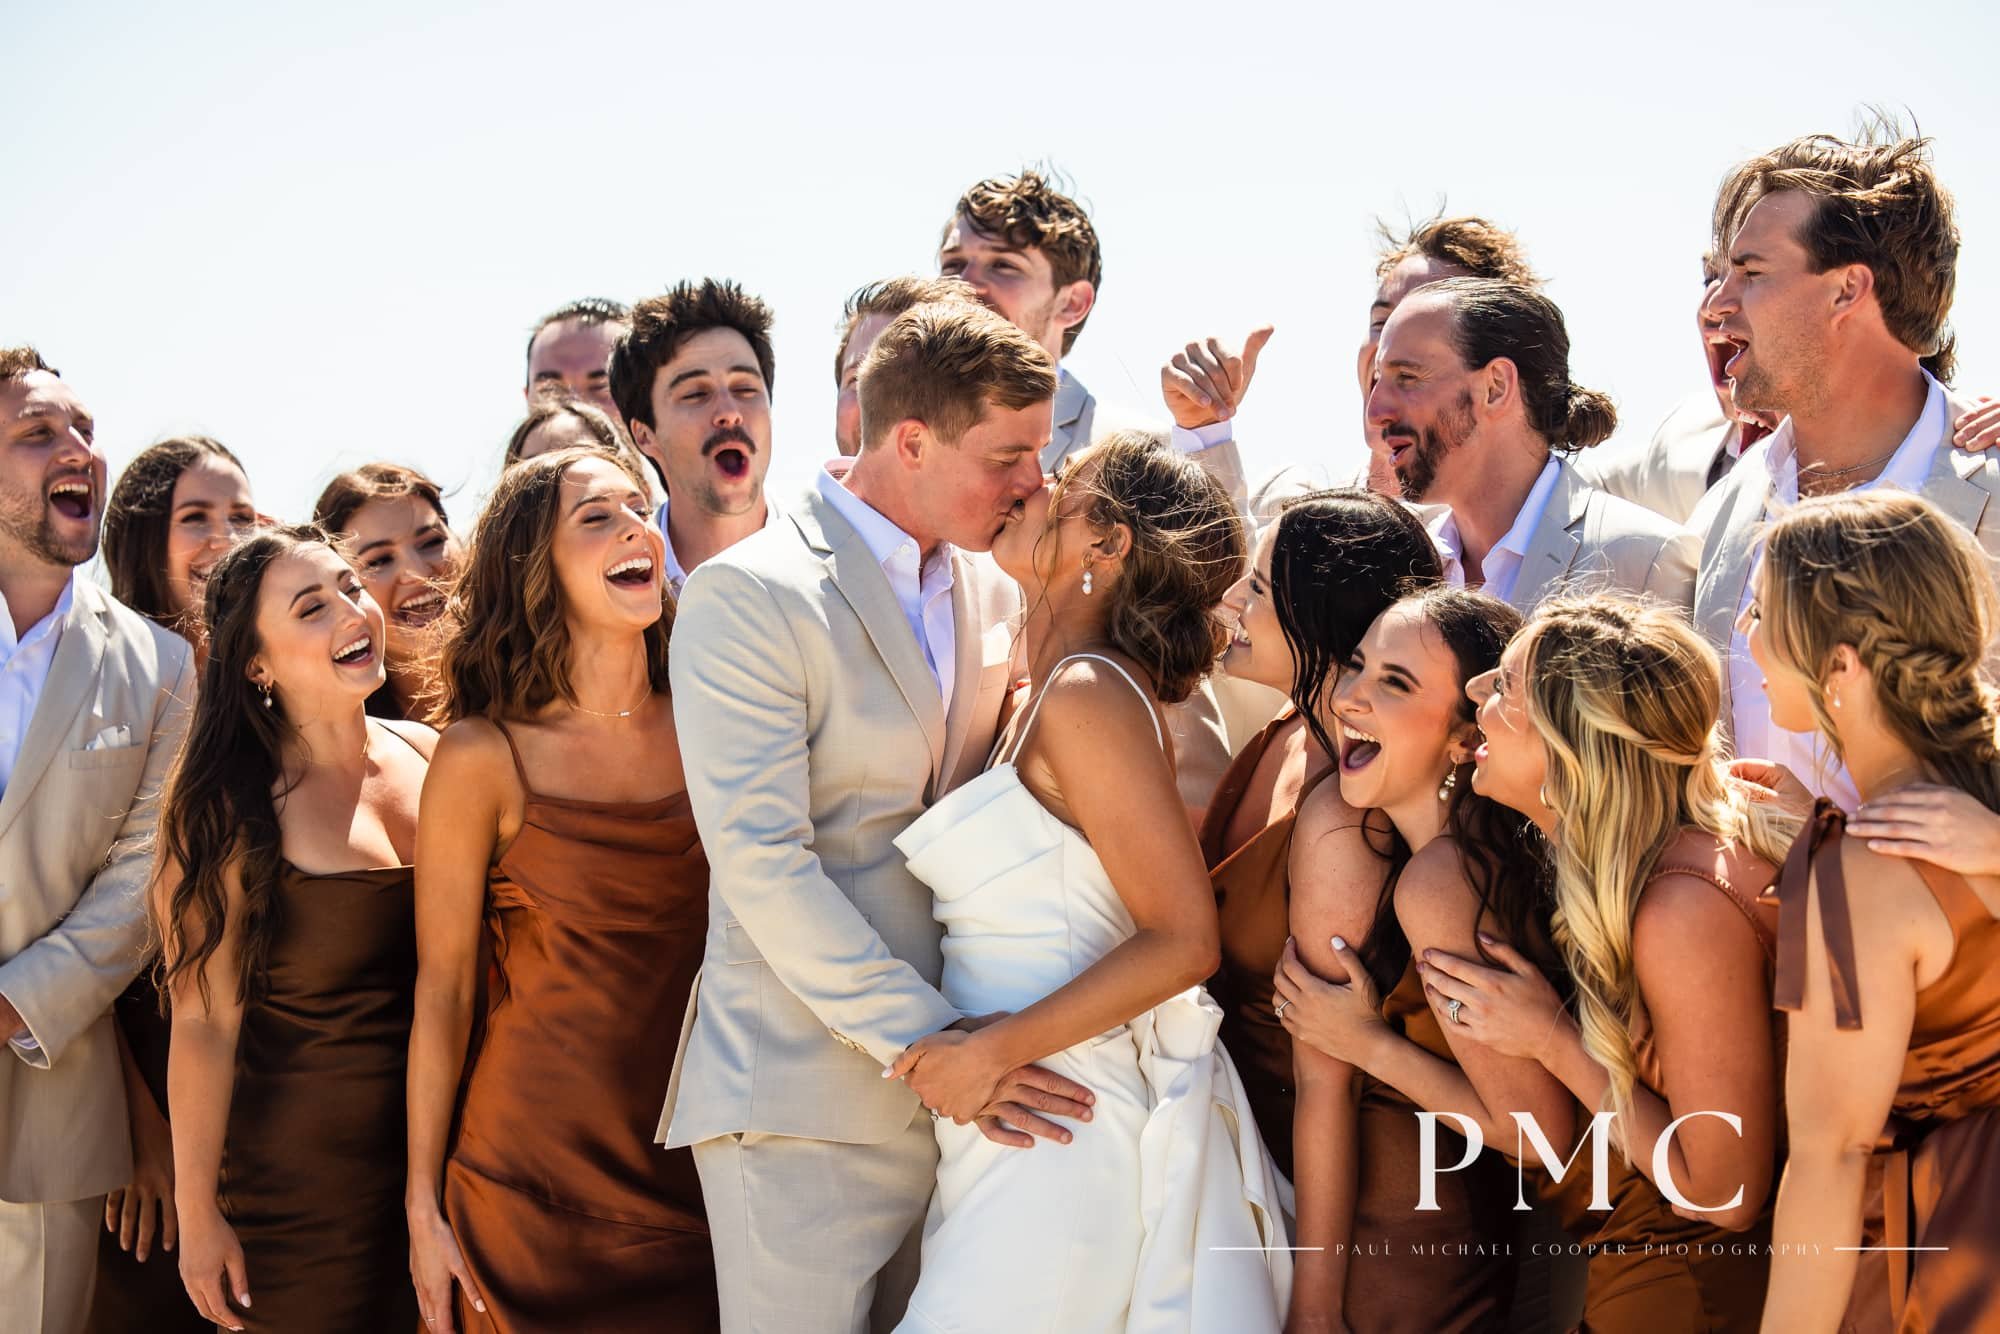 A bride and groom kiss while surrounded by their cheering wedding bridal party.